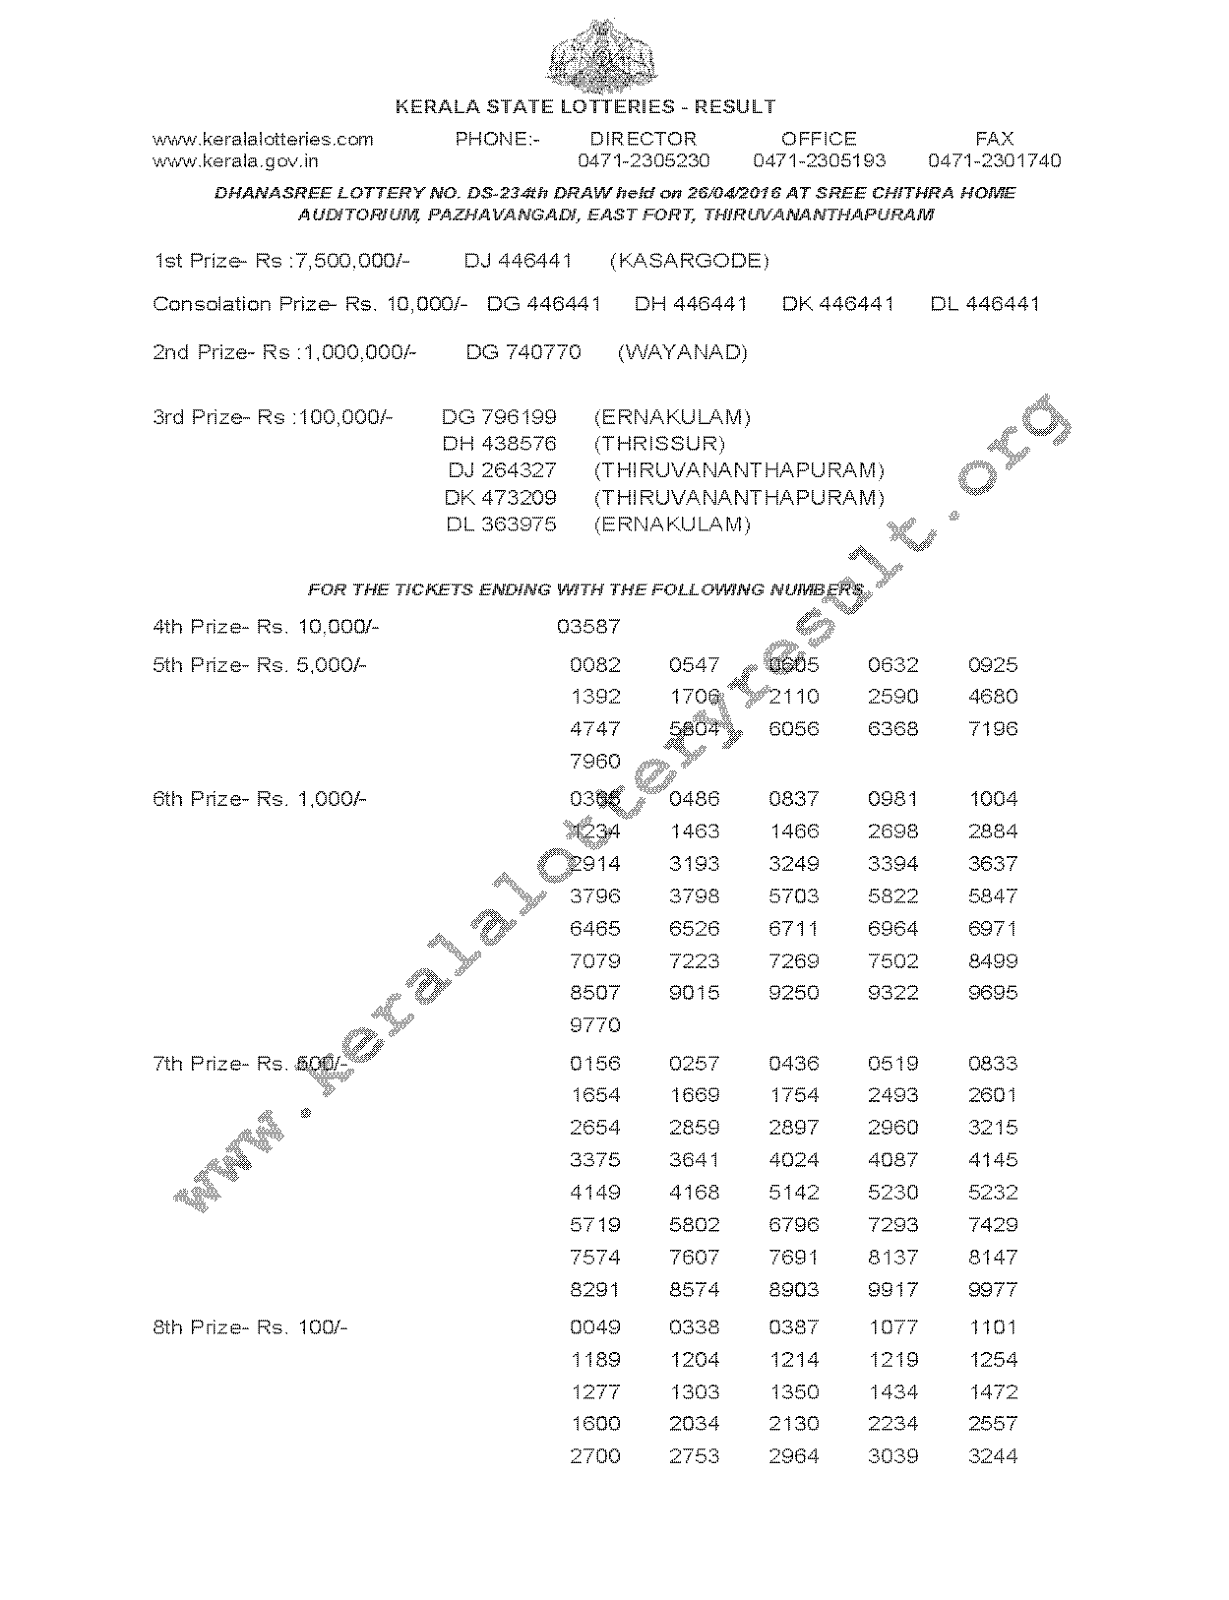 DHANASREE Lottery DS 234 Result 26-4-2016